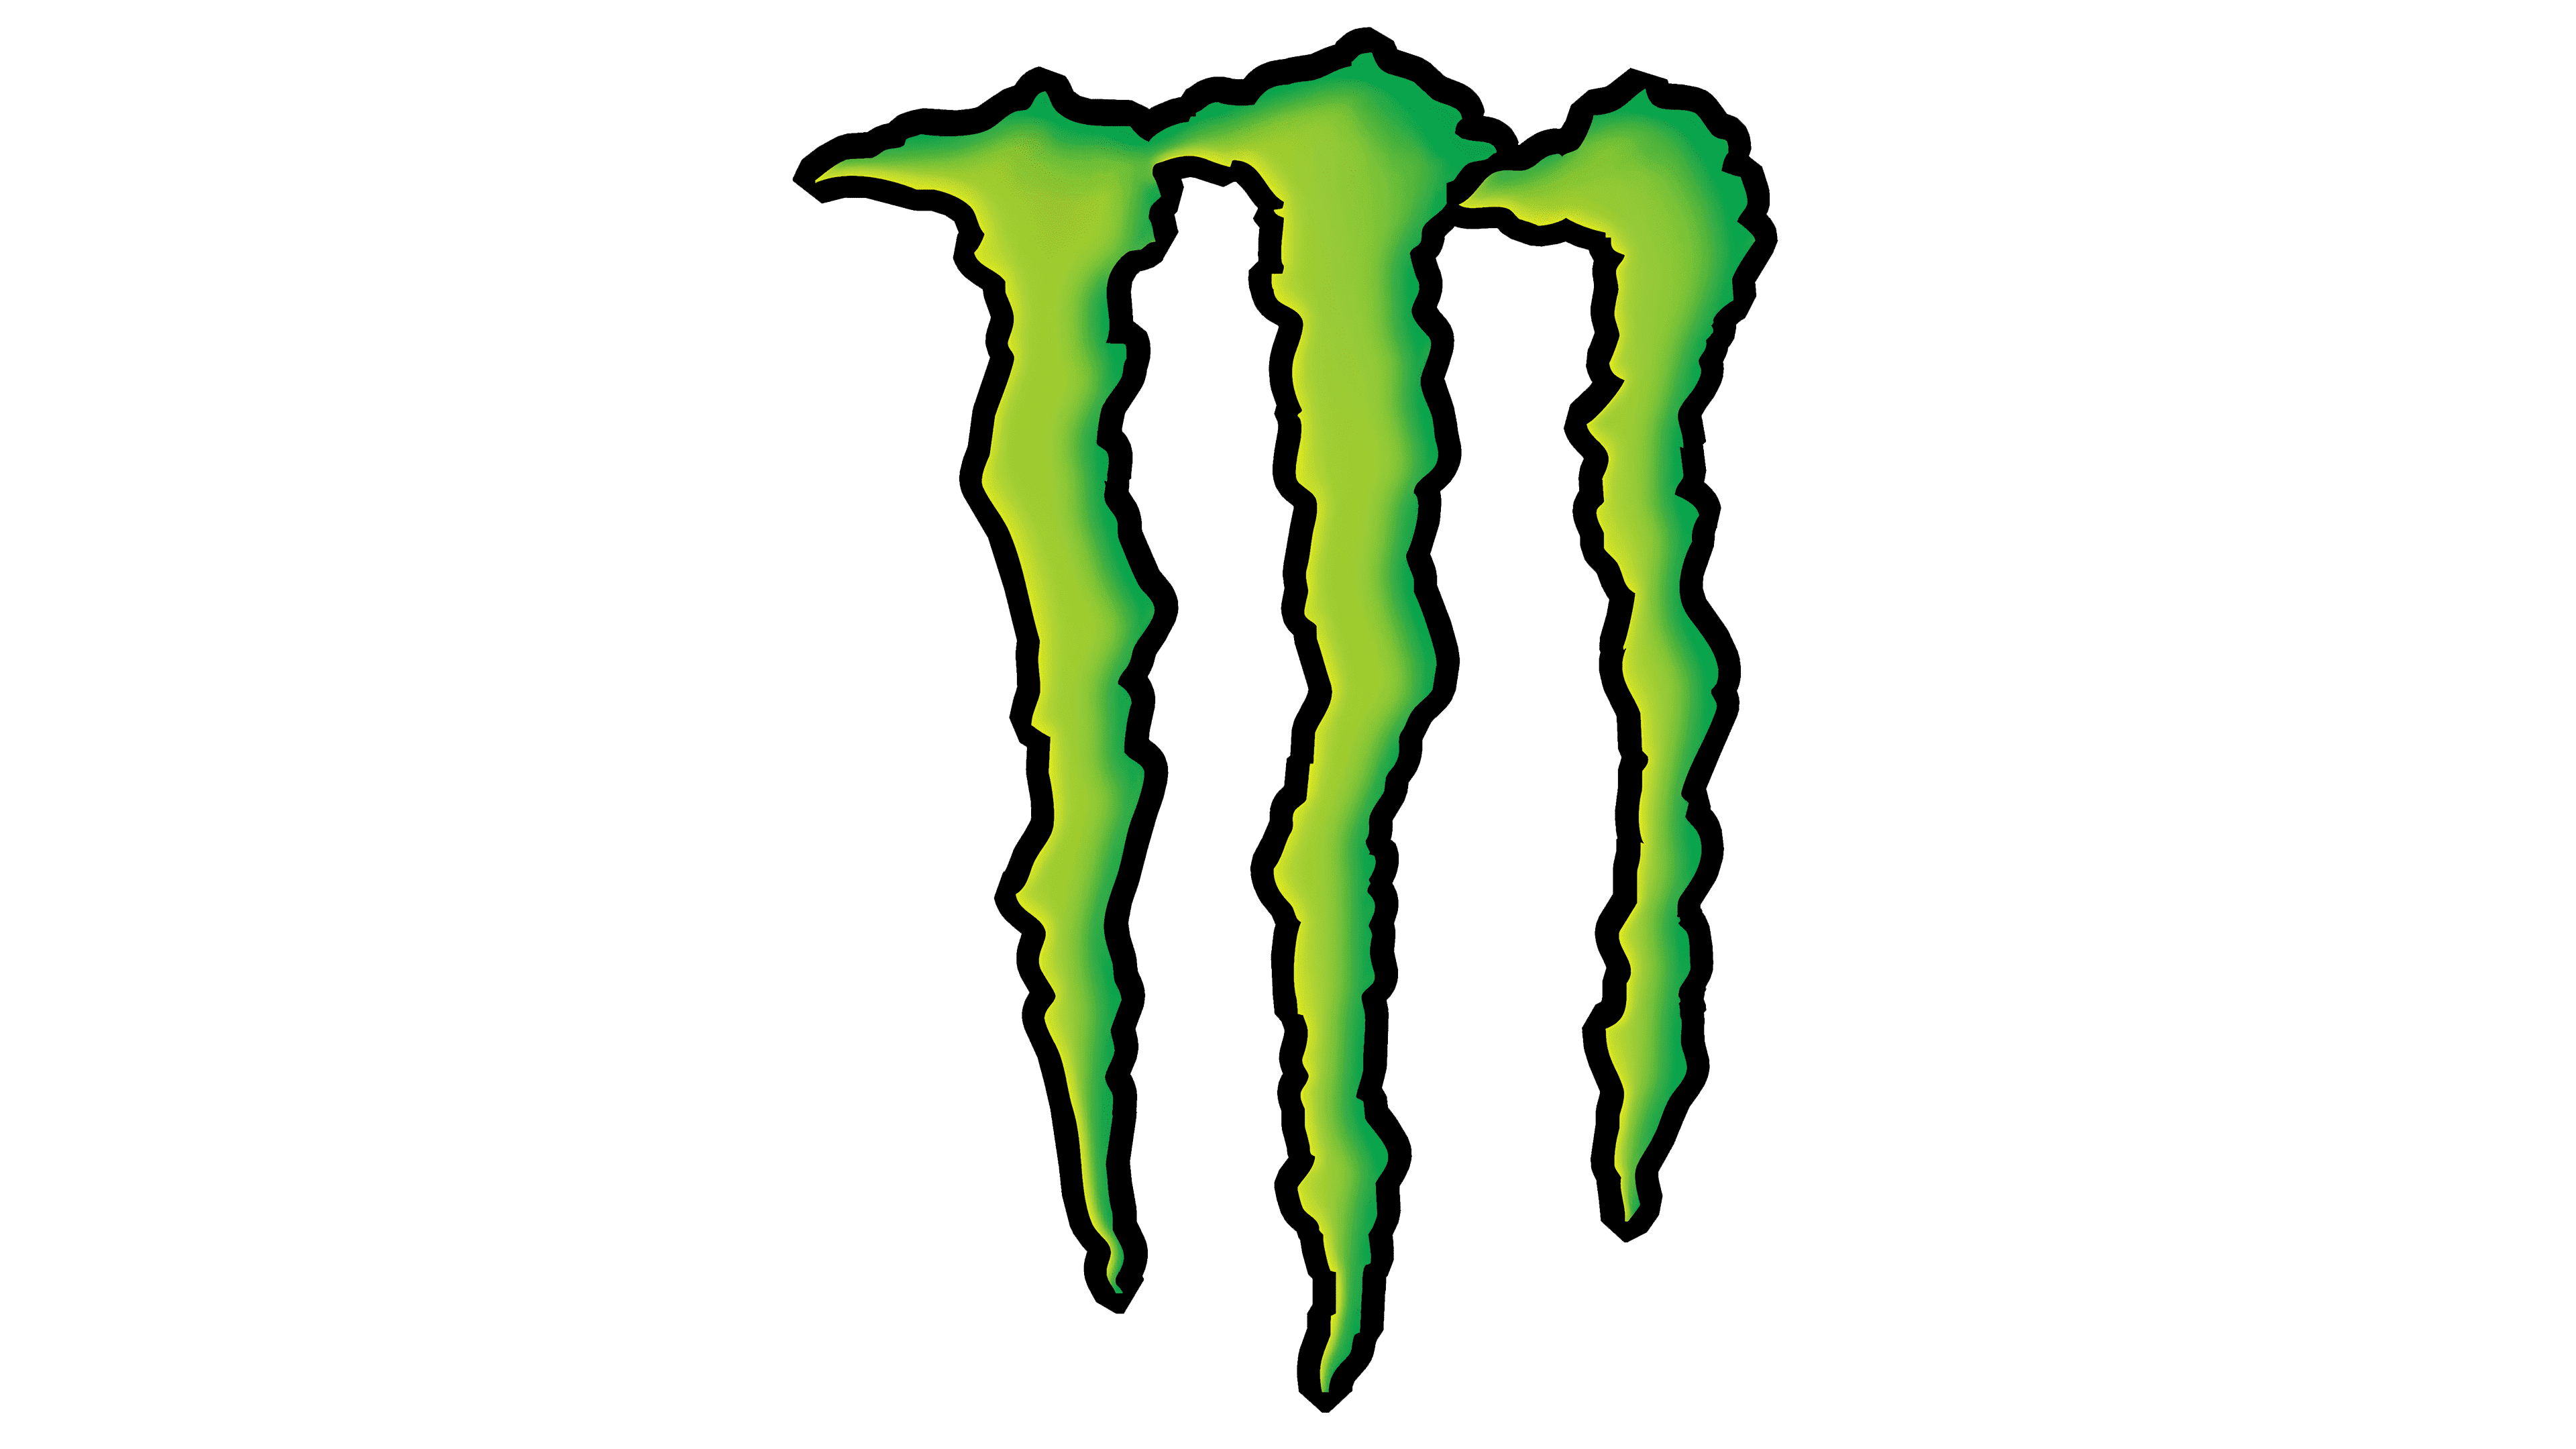 Monster Energy Logo And Symbol Meaning History Png